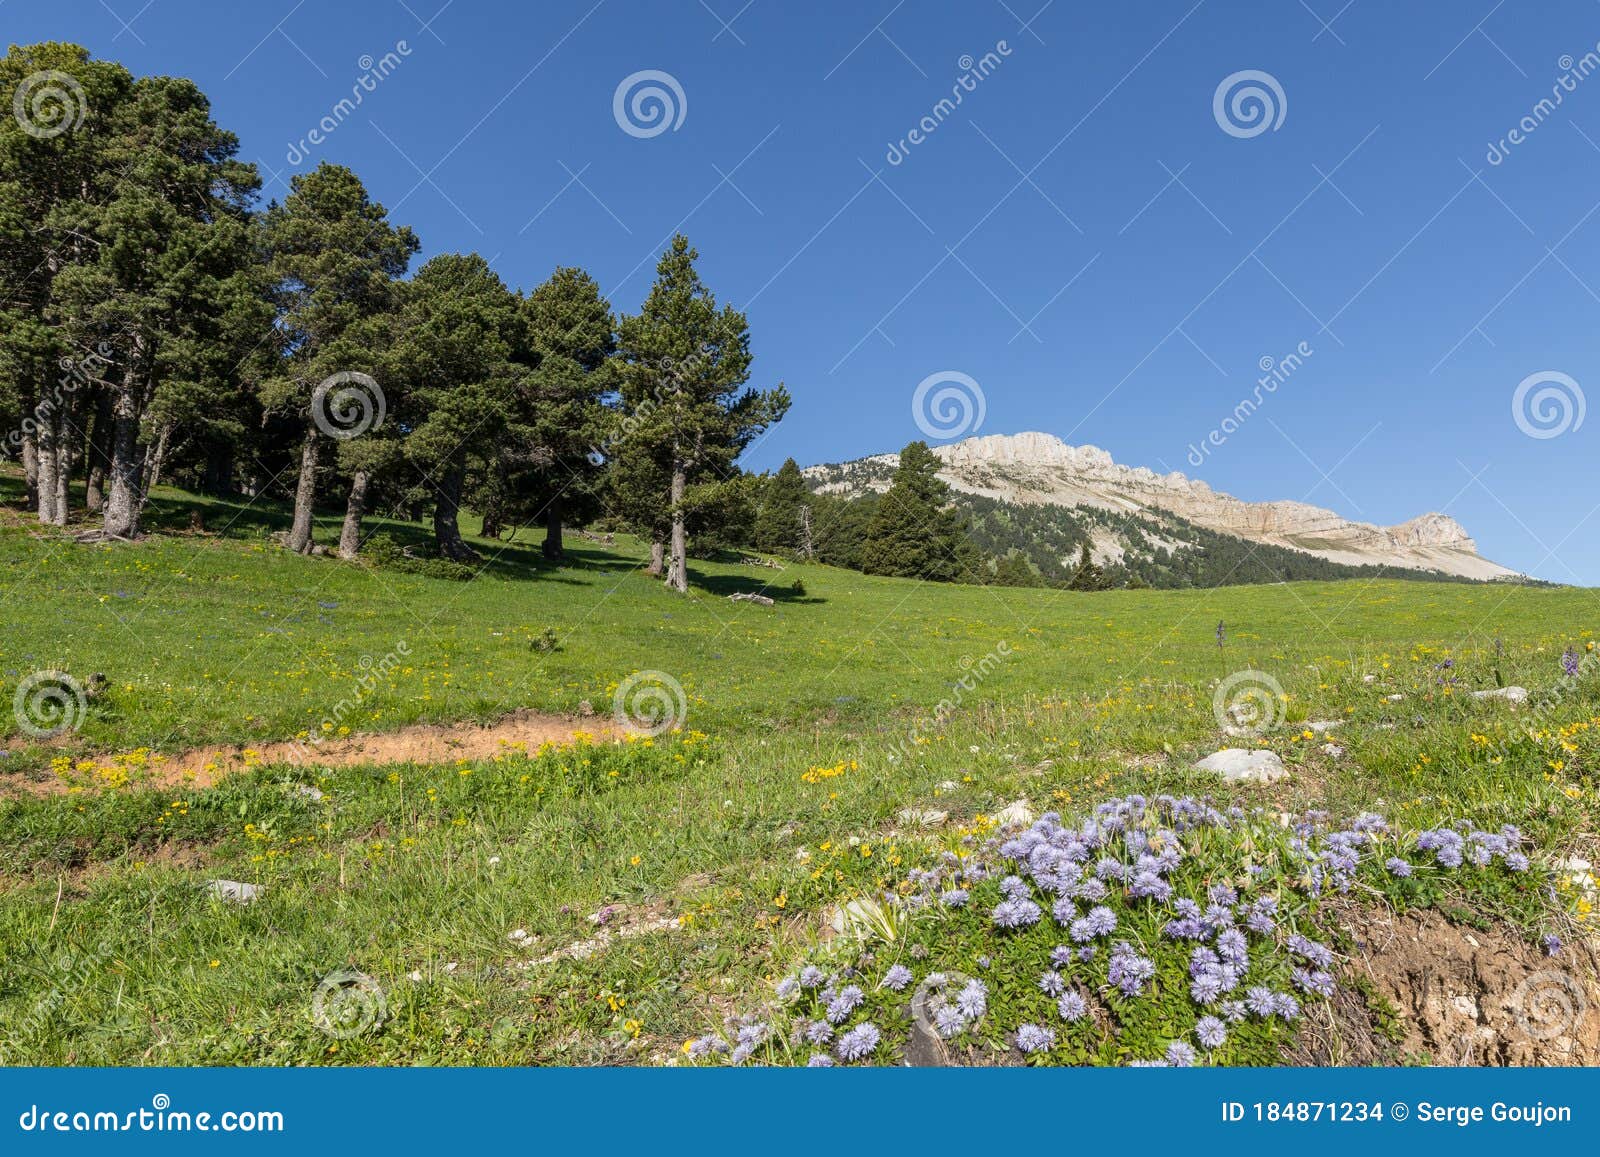 landscape of the high plateaus of the south vercors, combeau valley, france